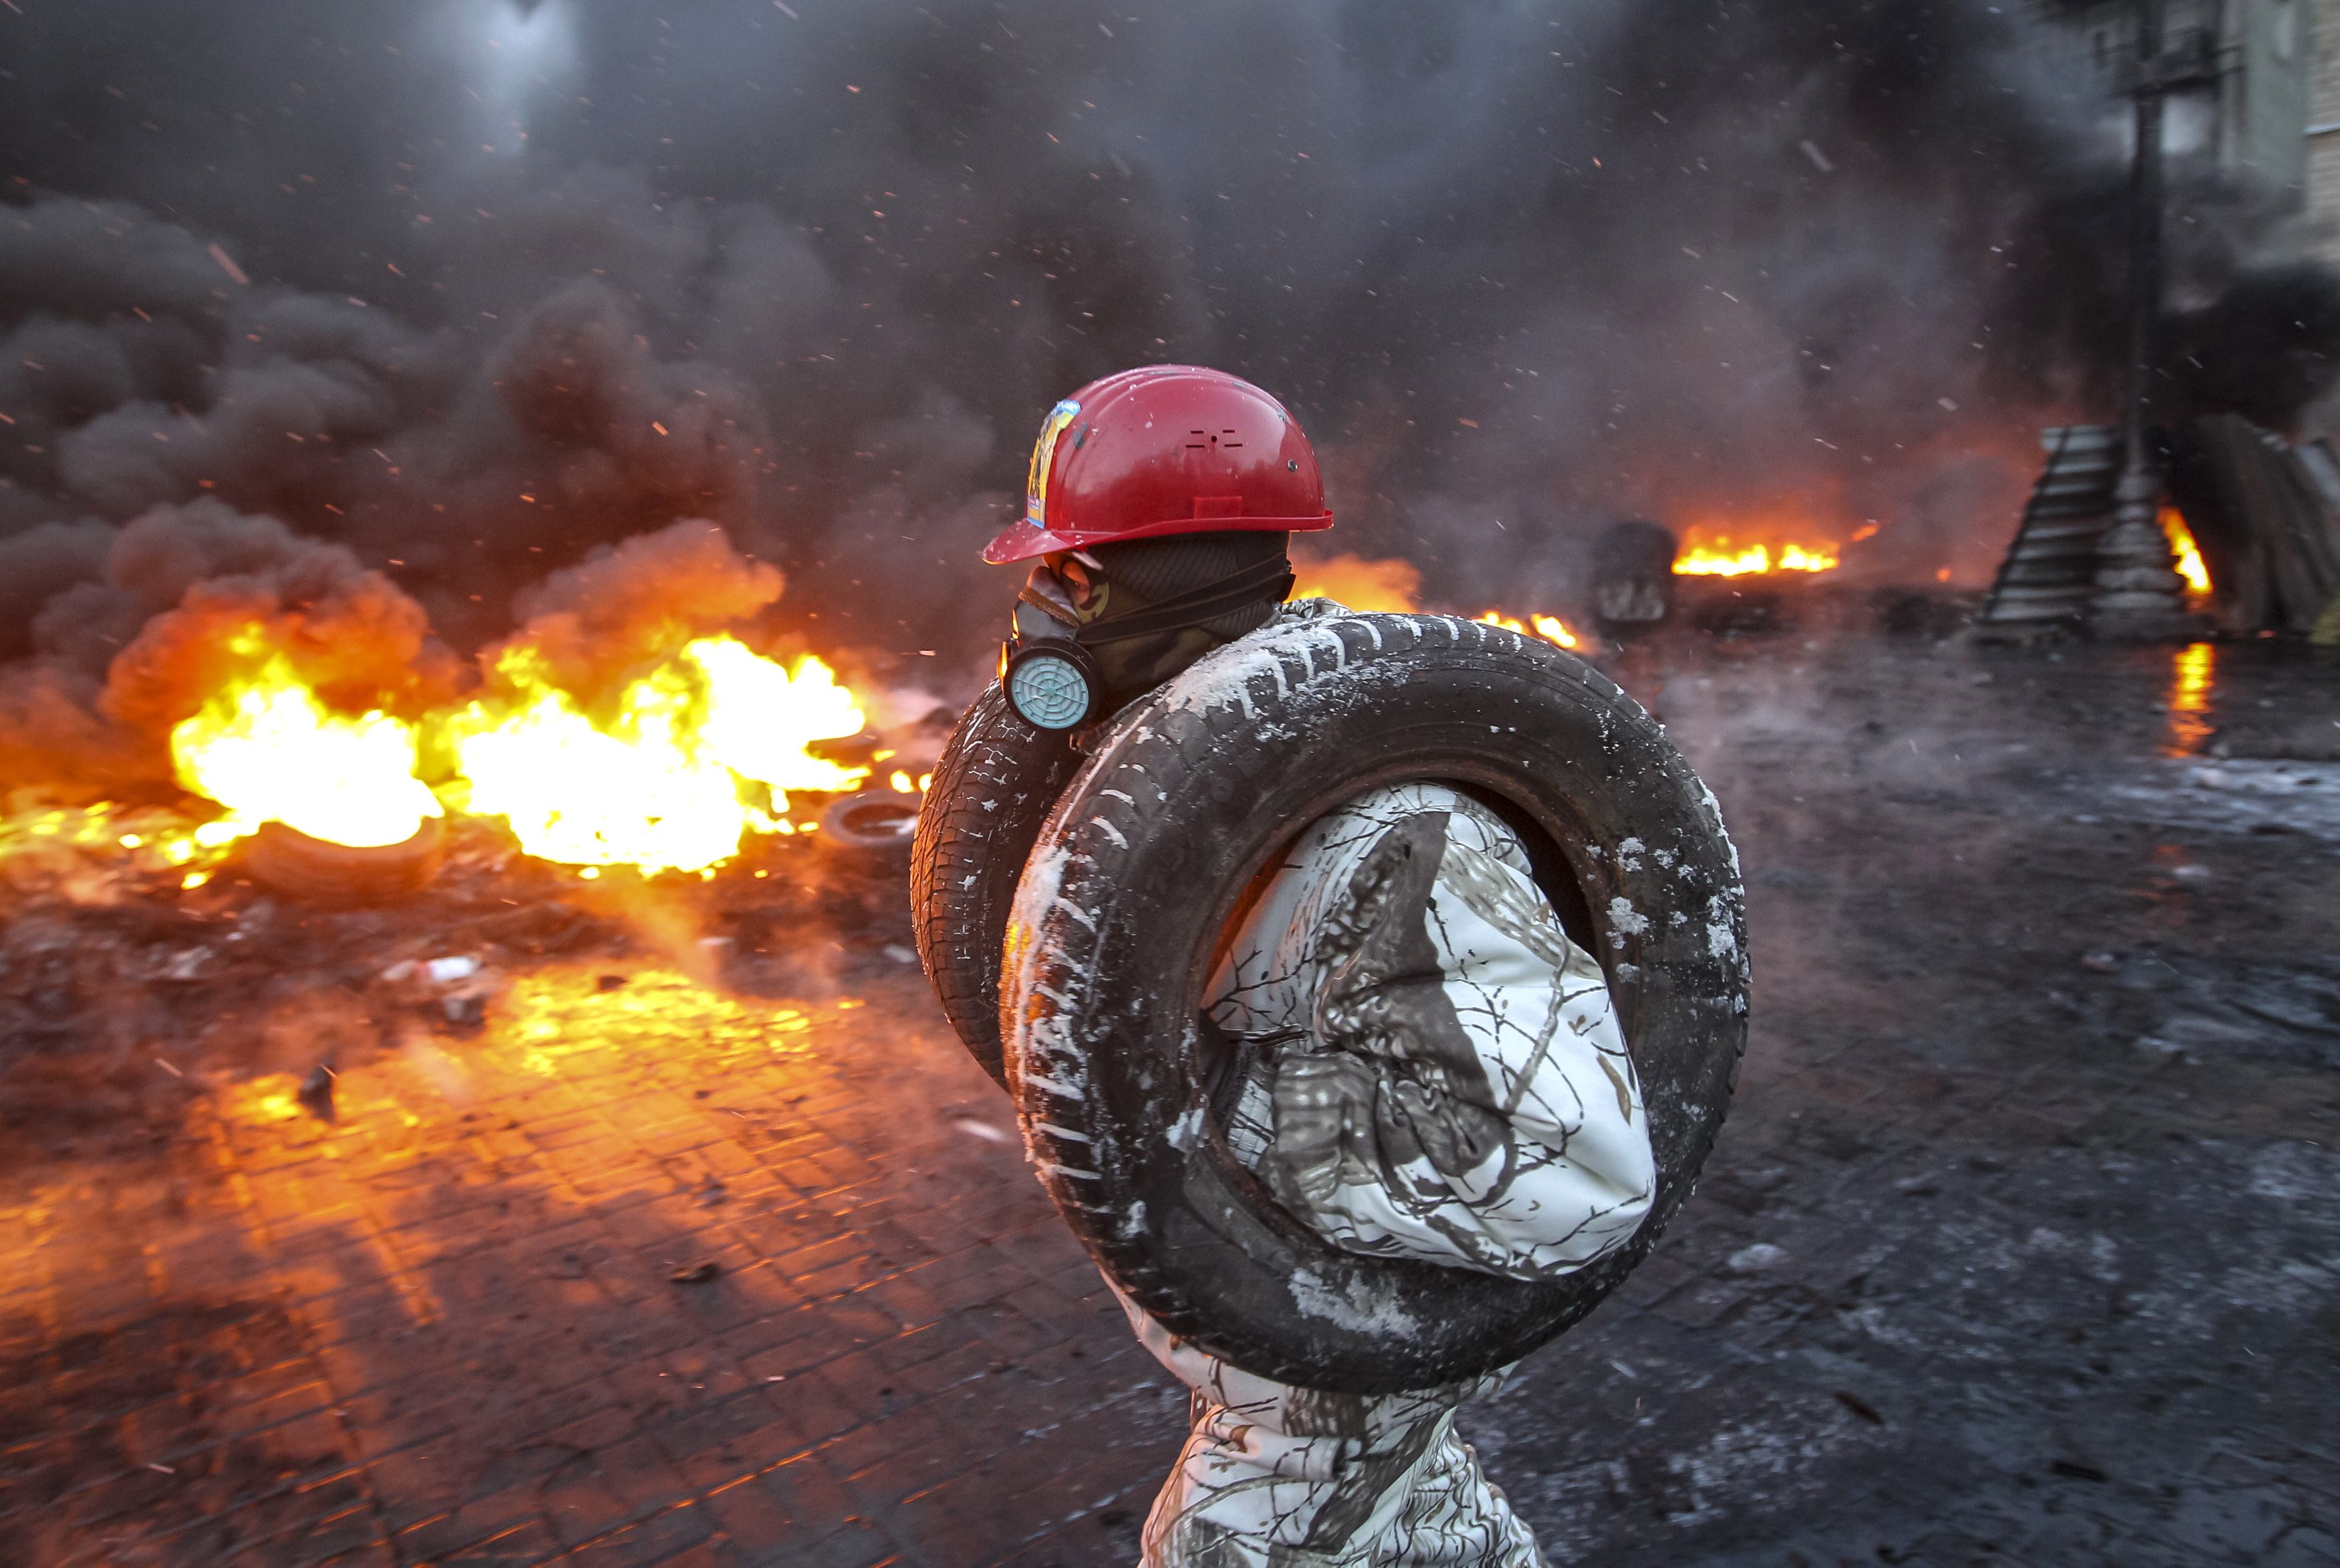 A pro-European integration protester carries tyres for burning at the site of clashes with riot police in Kiev January 23, 2014. Ukrainian opposition leaders emerged from crisis talks with President Viktor Yanukovich on Wednesday saying he had failed to give concrete answers to their demands, and told their supporters on the streets to prepare for a police offensive. REUTERS/Valentyn Ogirenko (UKRAINE - Tags: POLITICS CIVIL UNREST)